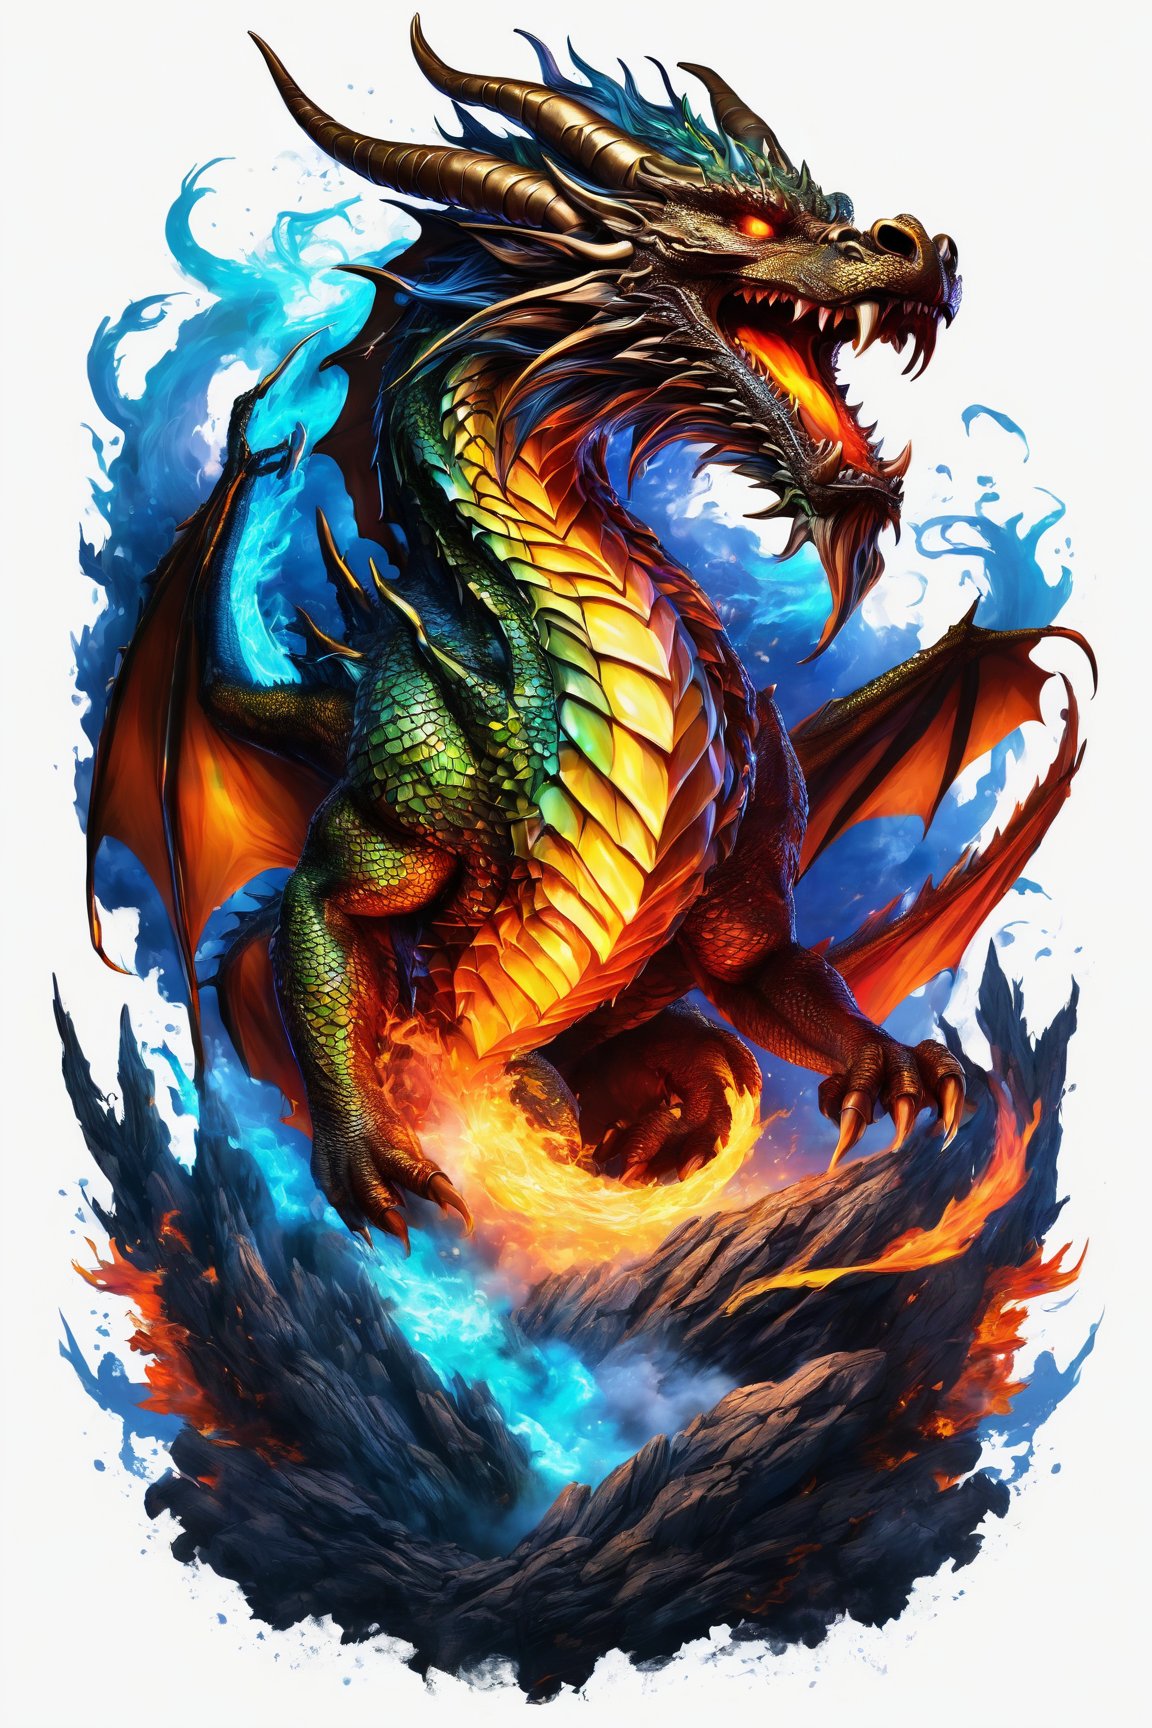 High-res, detailed dragon illustration, vibrant colors, dynamic pose, epic battle scene, mythical creature, fantasy artwork, intricate scales, fiery breath, intense lighting, intricate linework, vector illustration, professional quality, vivid colors, powerful and majestic, dragon in flight, fantasy t-shirt design.